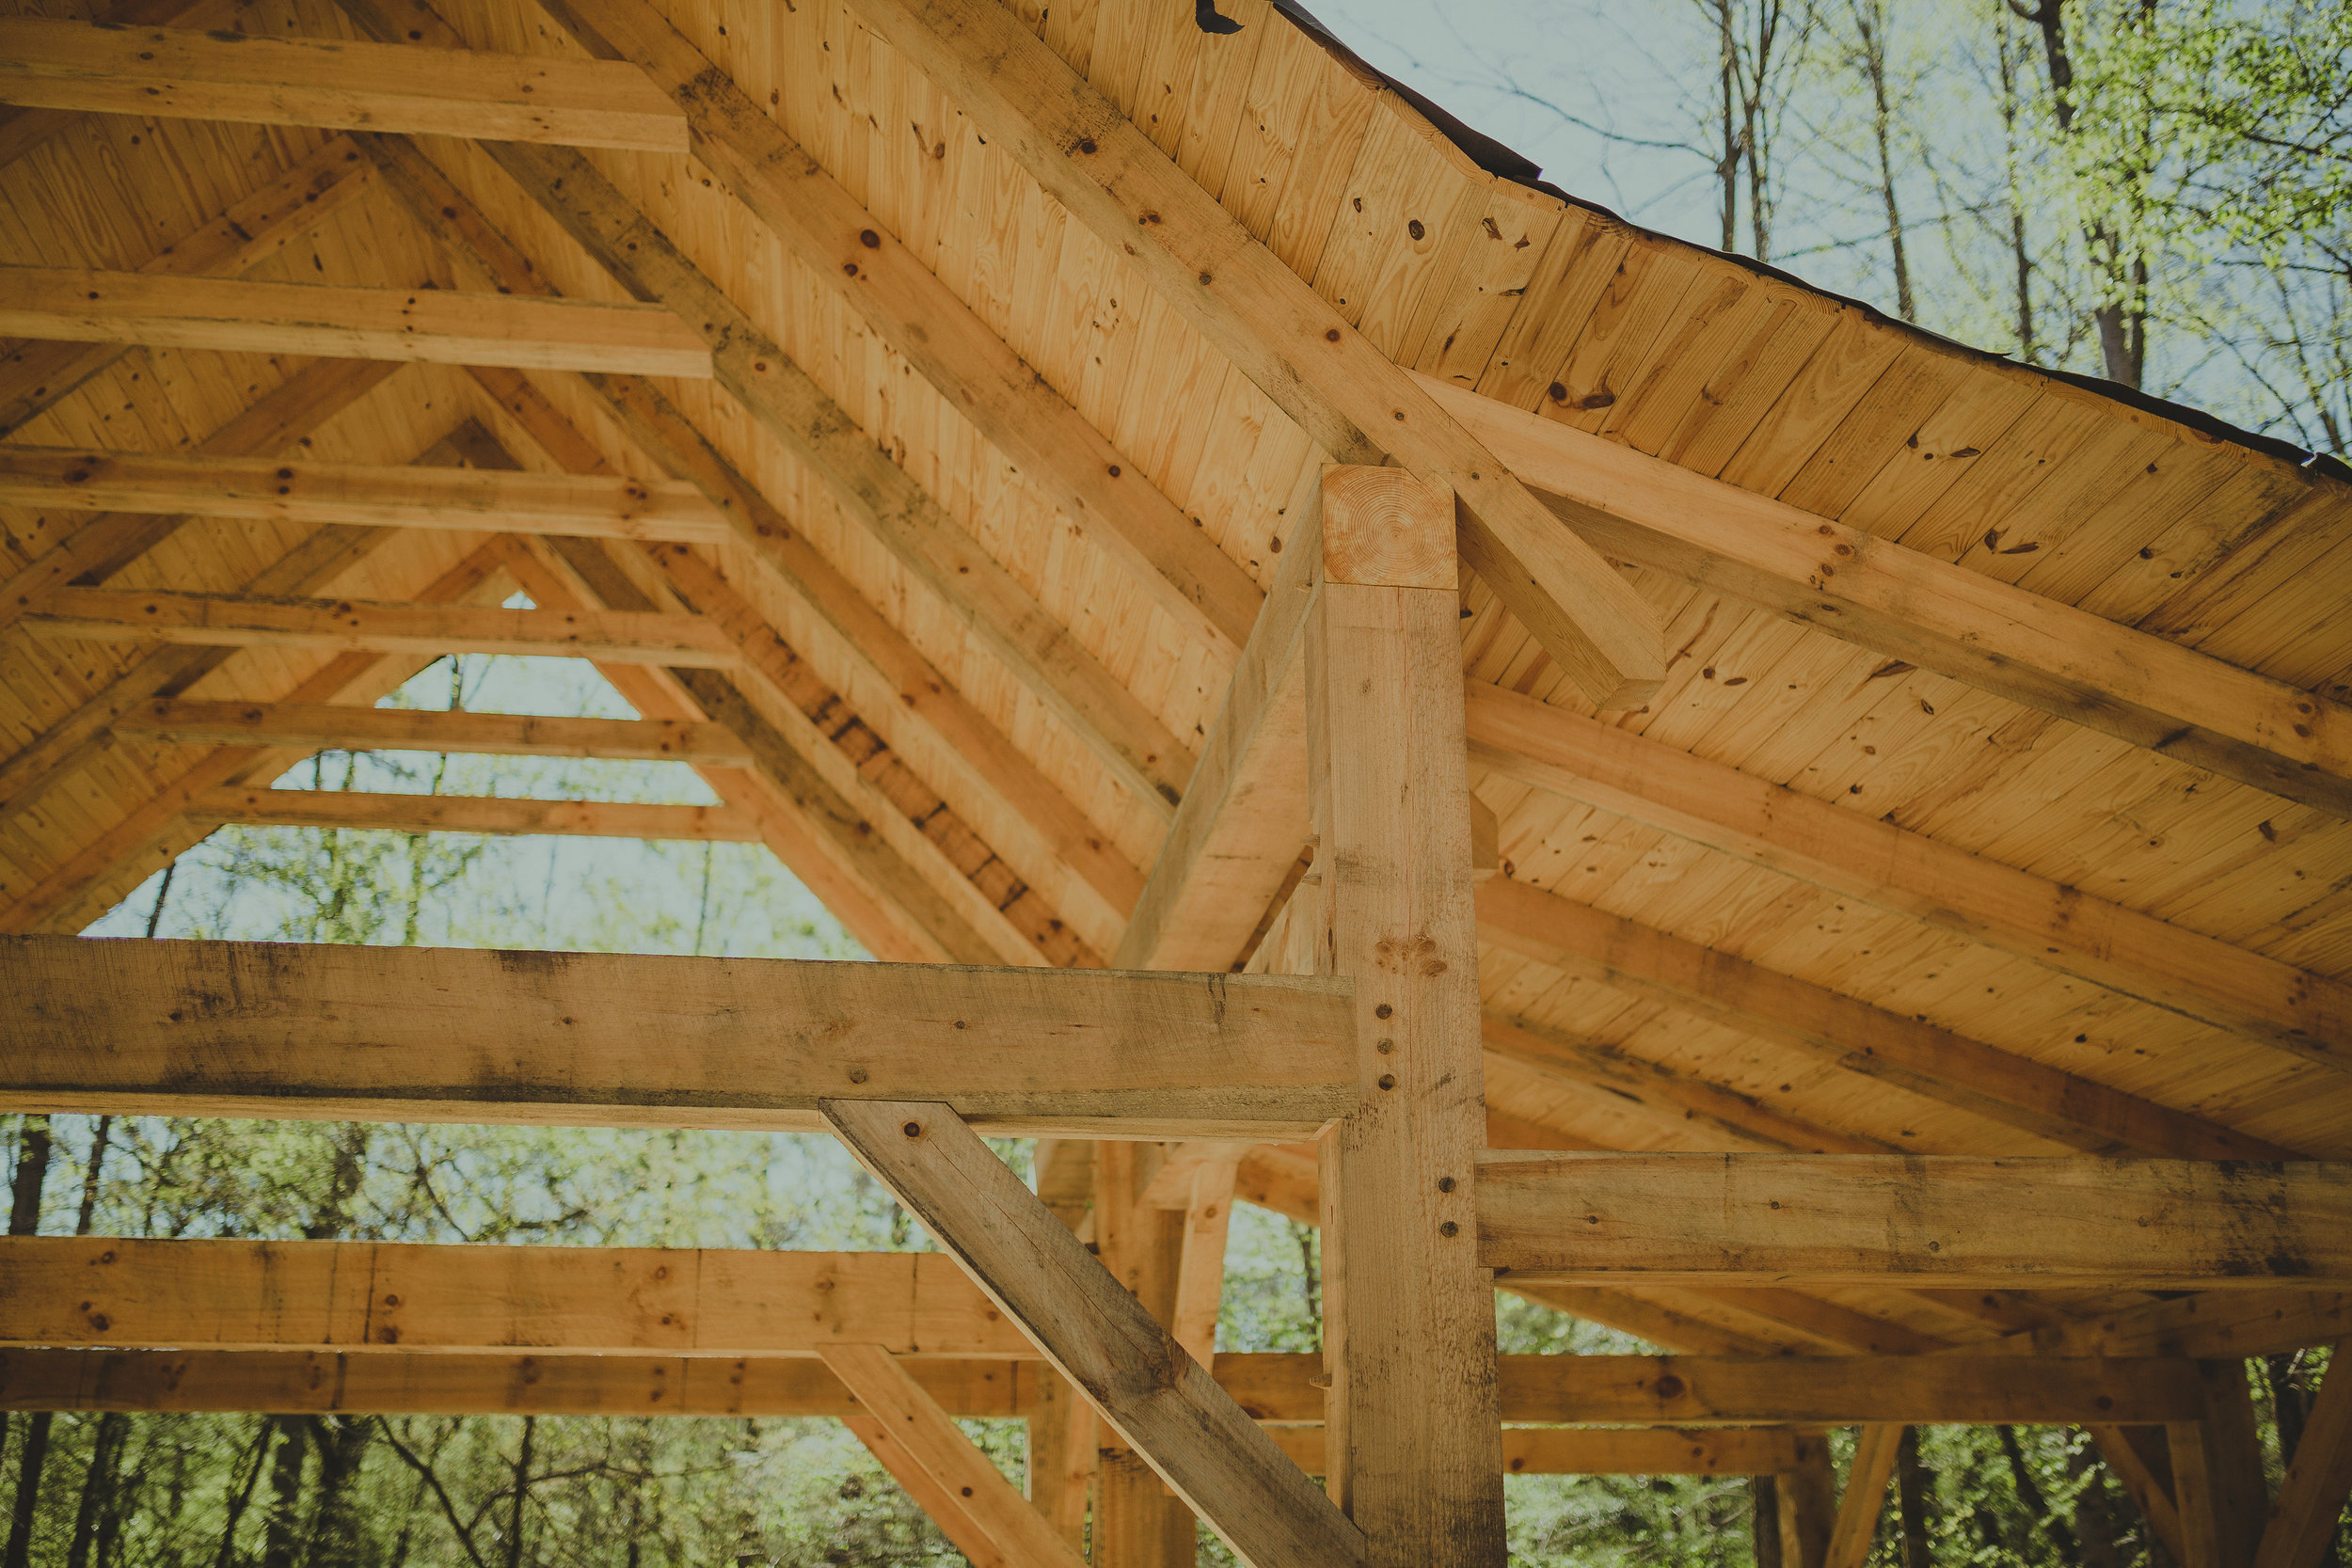  hand crafted workshop outbuilding timber frame eastern white pine athens georgia 